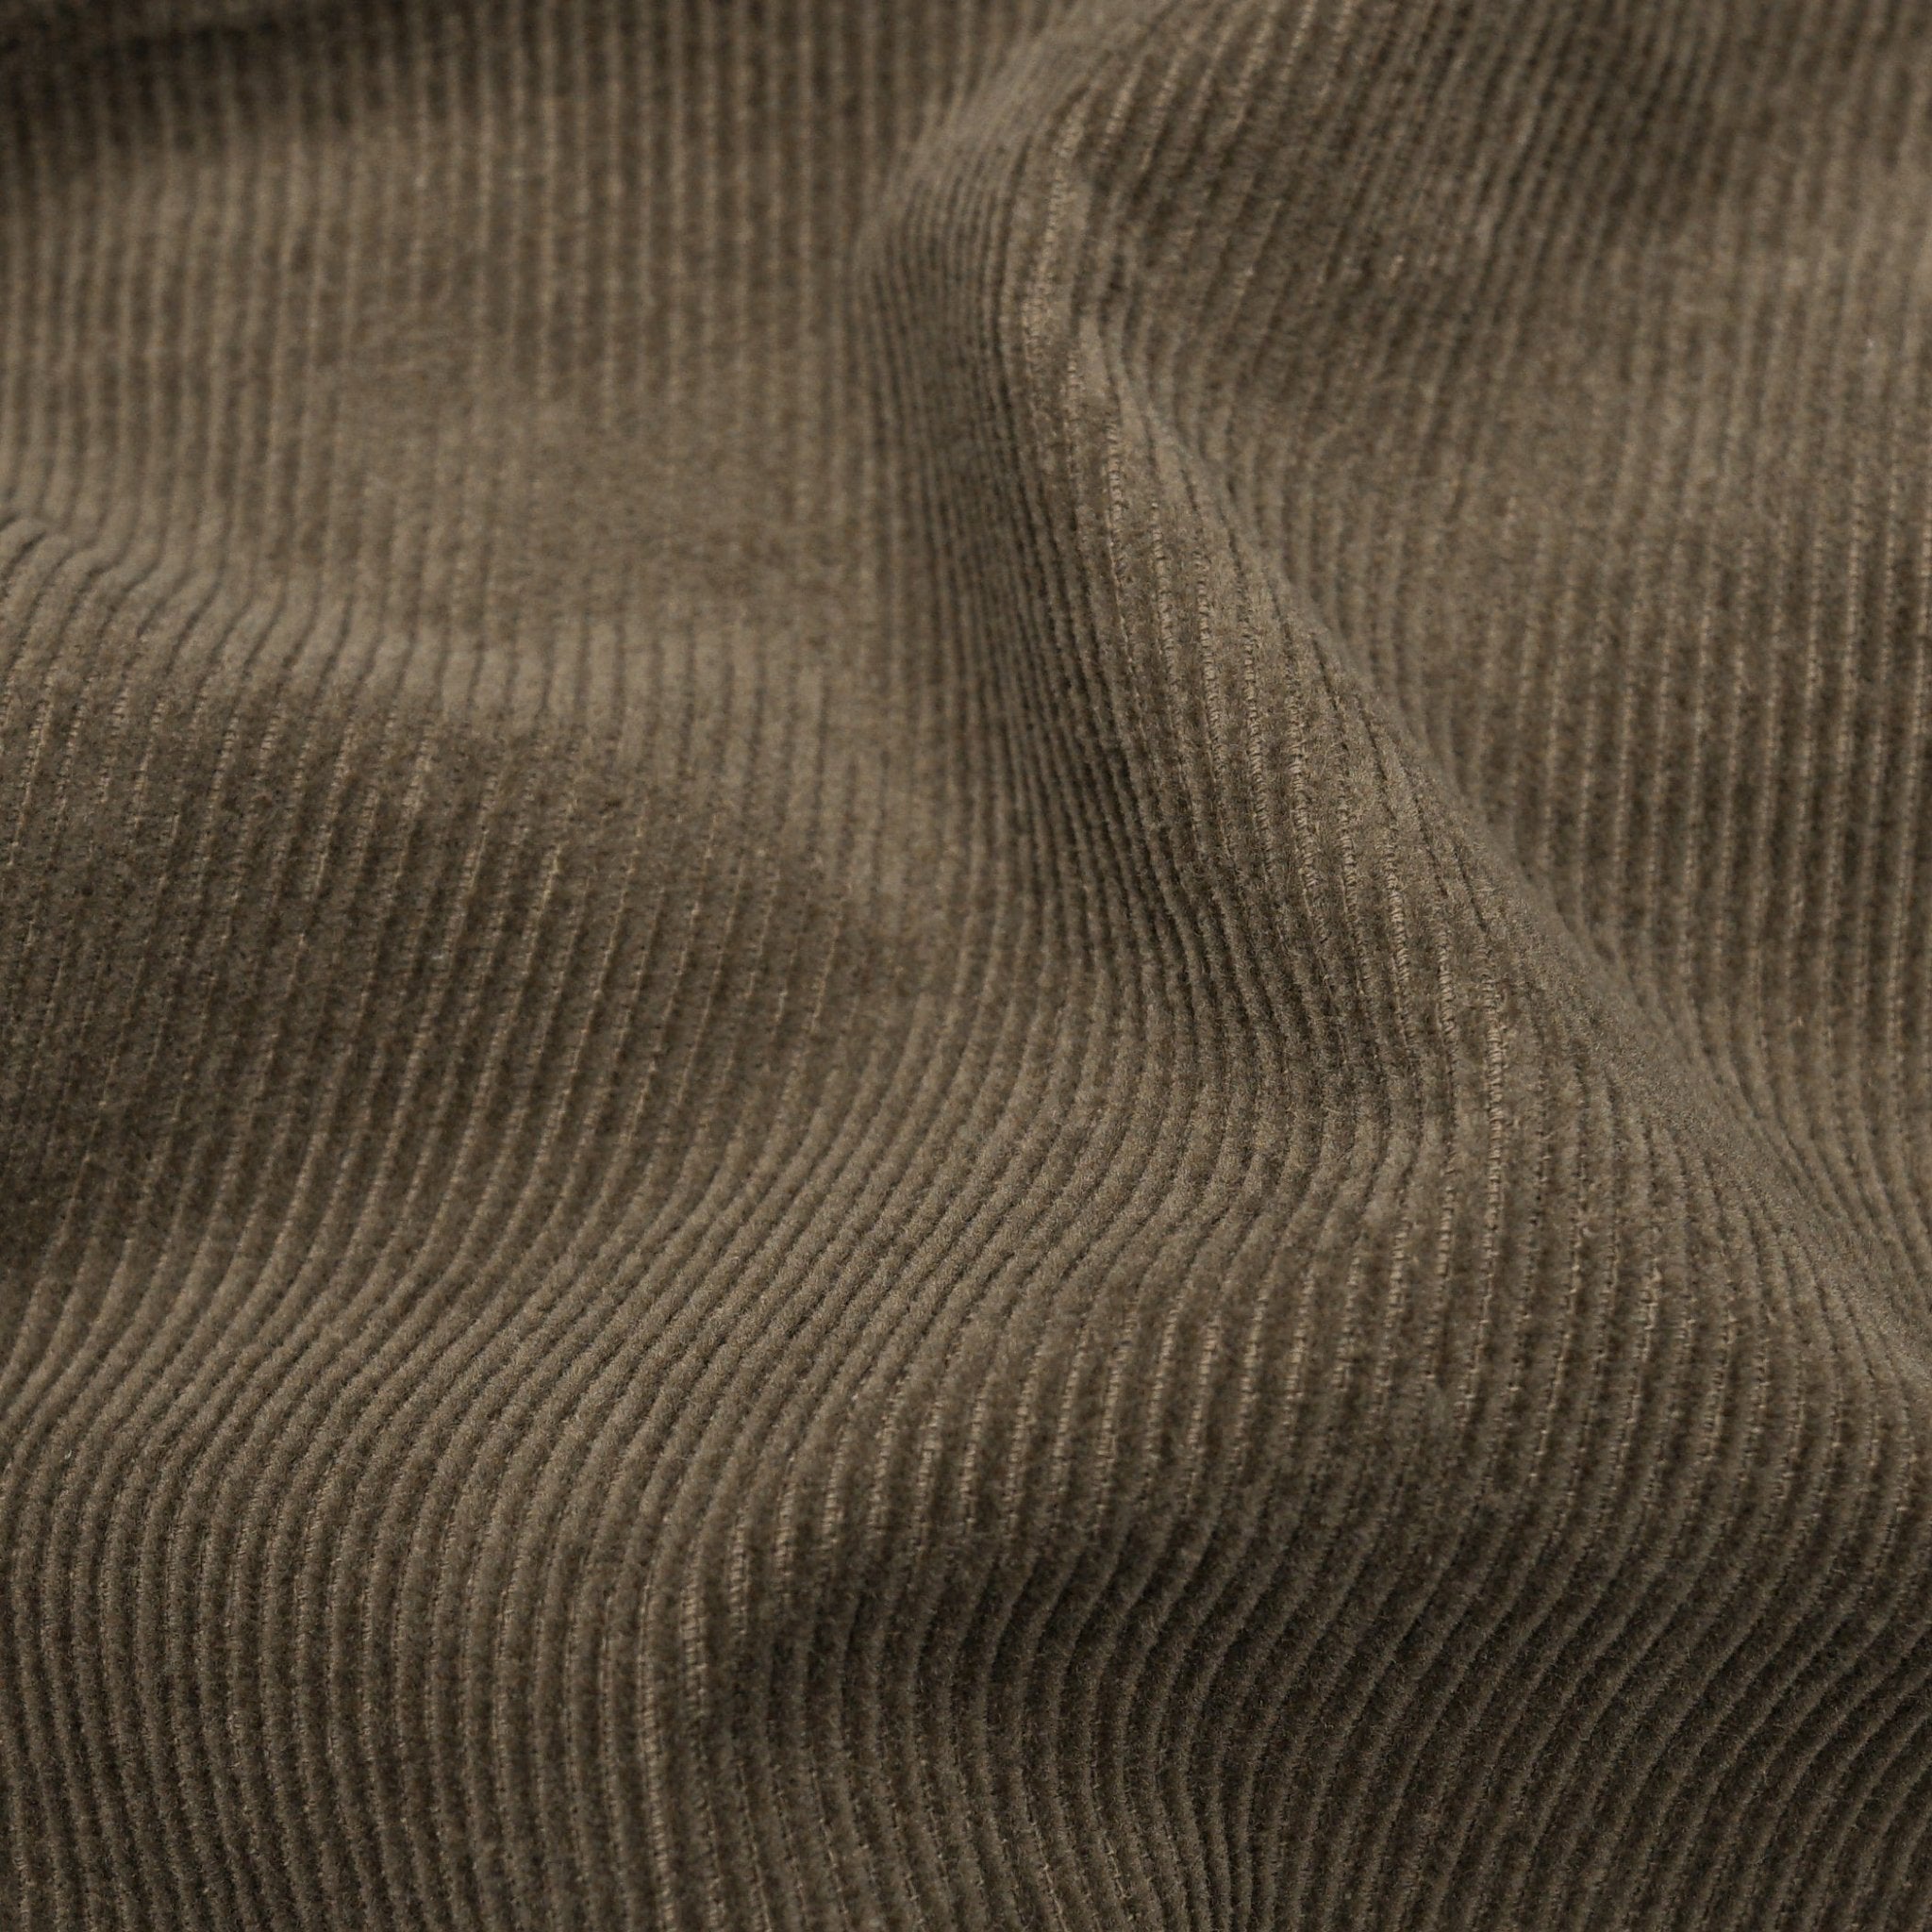 Never Fold Corduroy Button-up in walnut - State Of Flux - State Of Flux